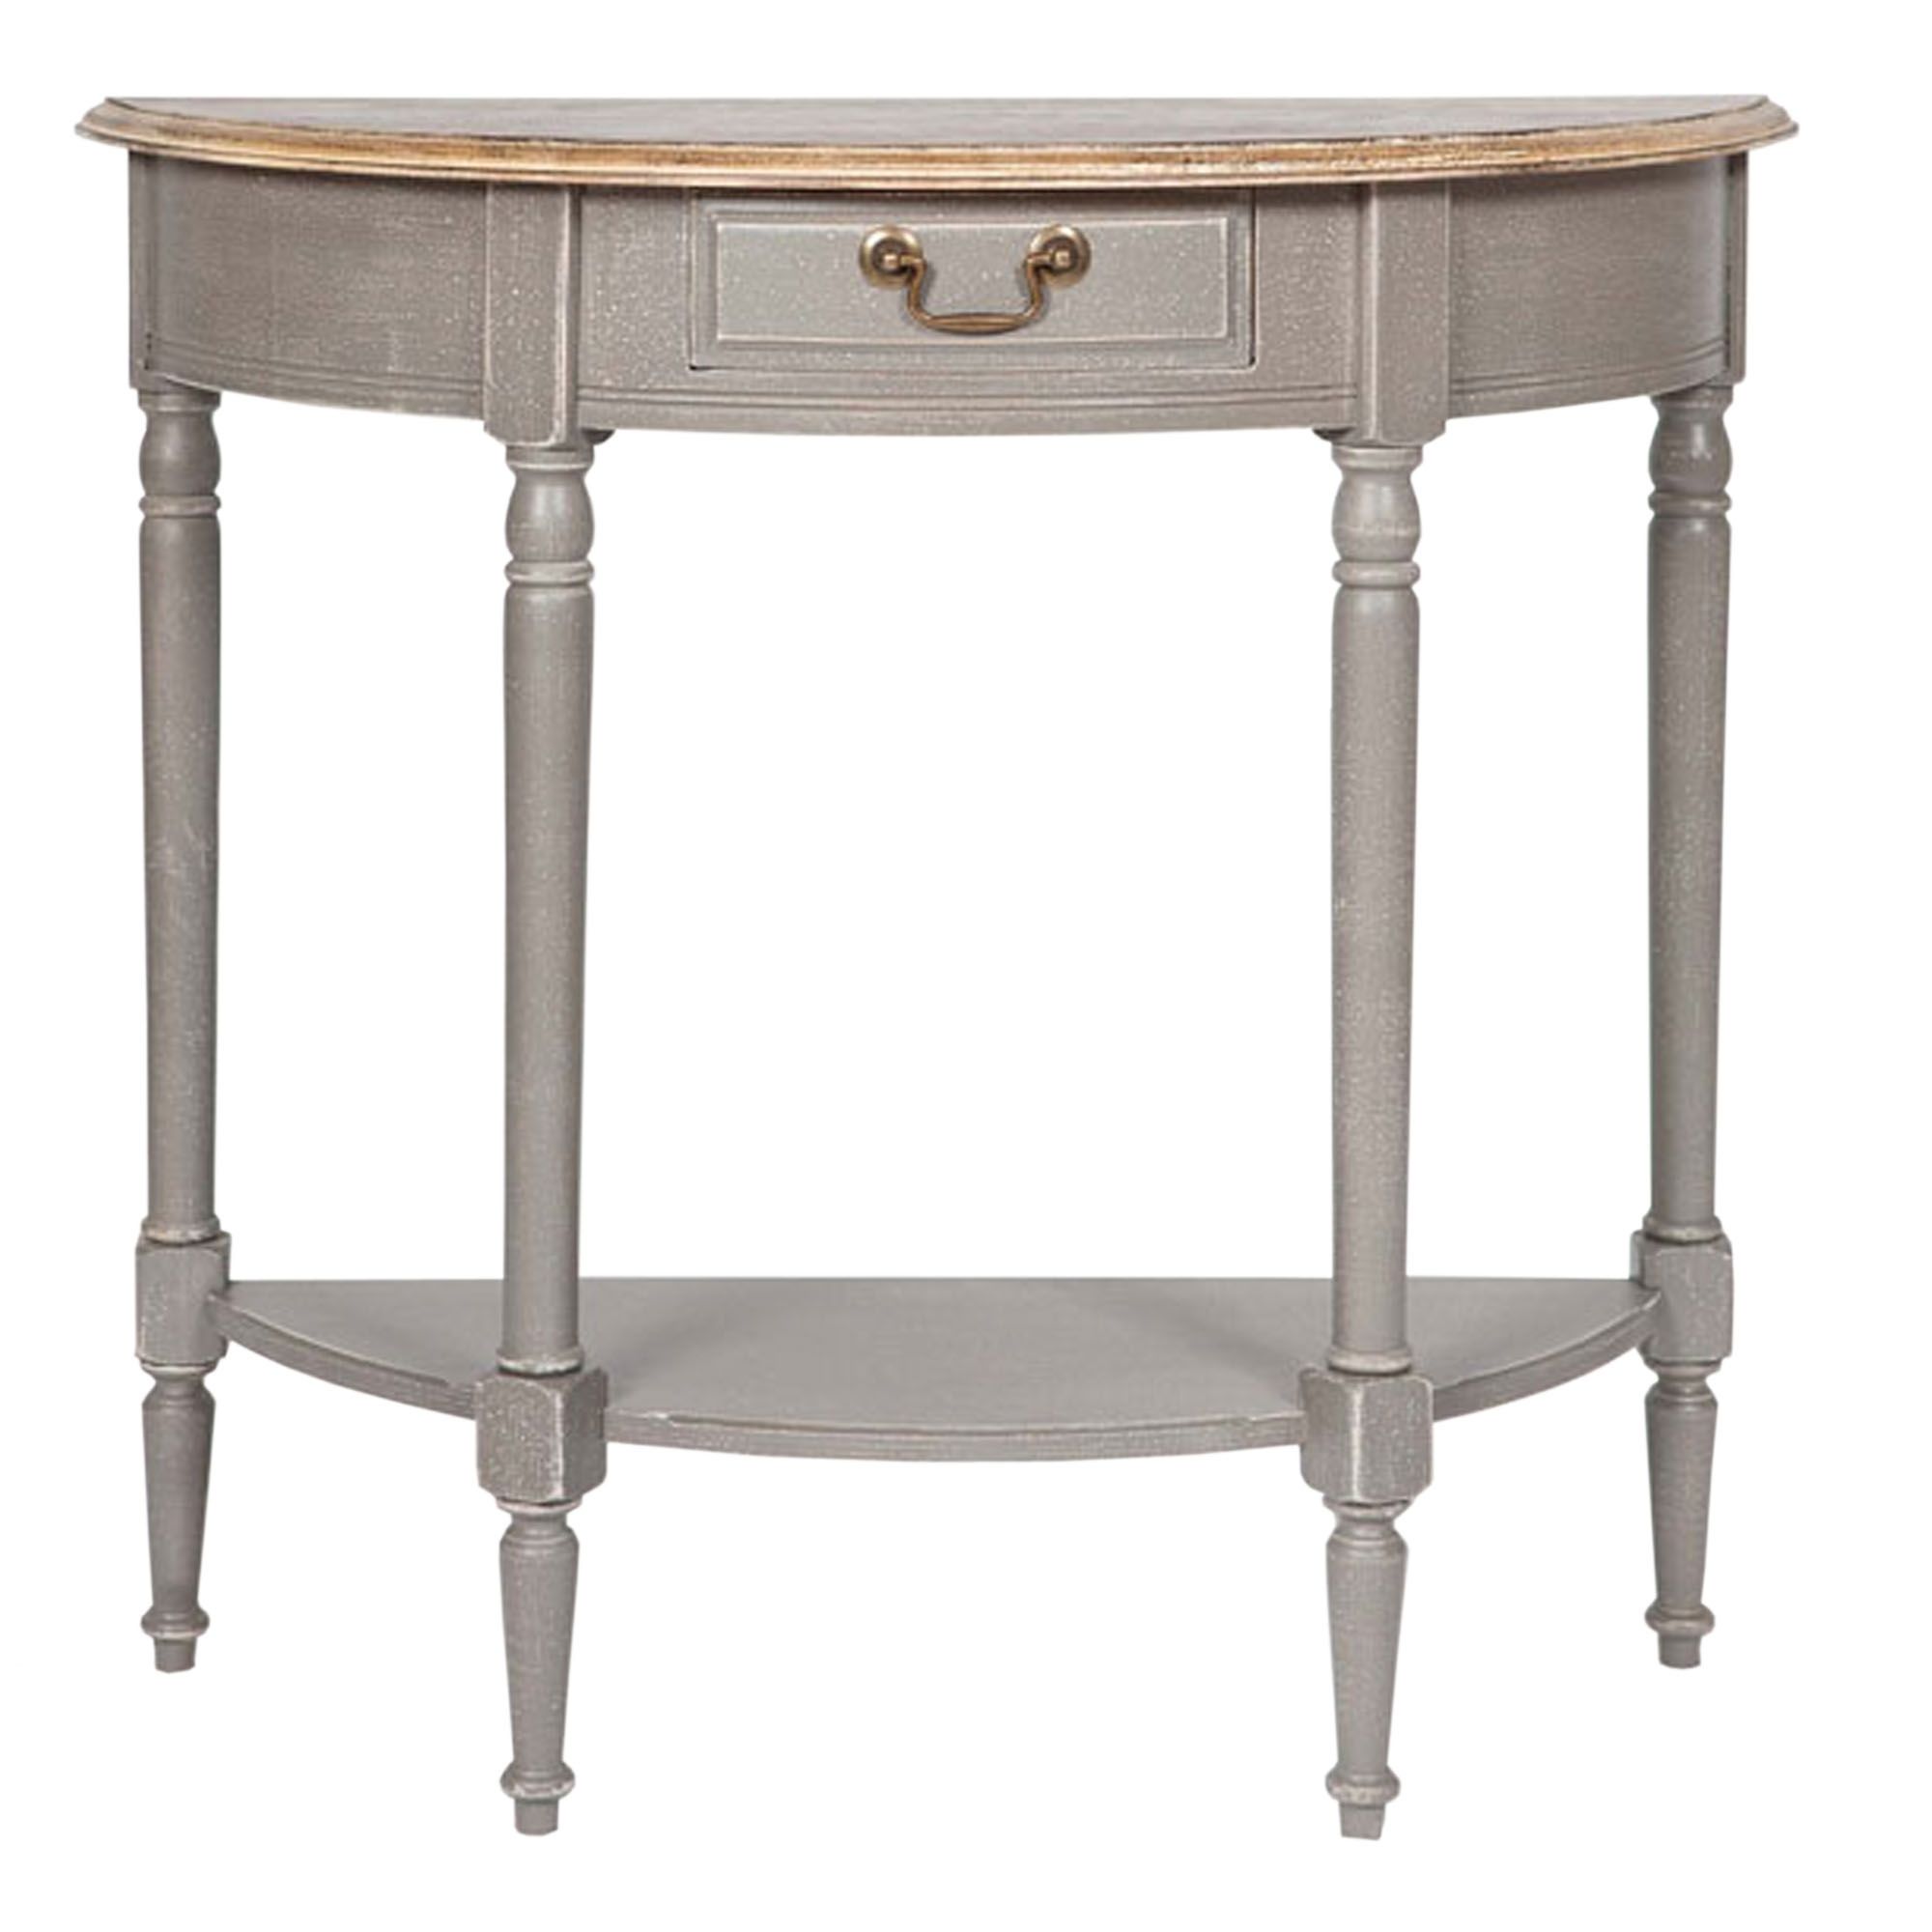 Poitiers Grey Shabby Chic Half Moon Console Table | Table | Hd365 Throughout Gray Wood Veneer Console Tables (View 12 of 20)